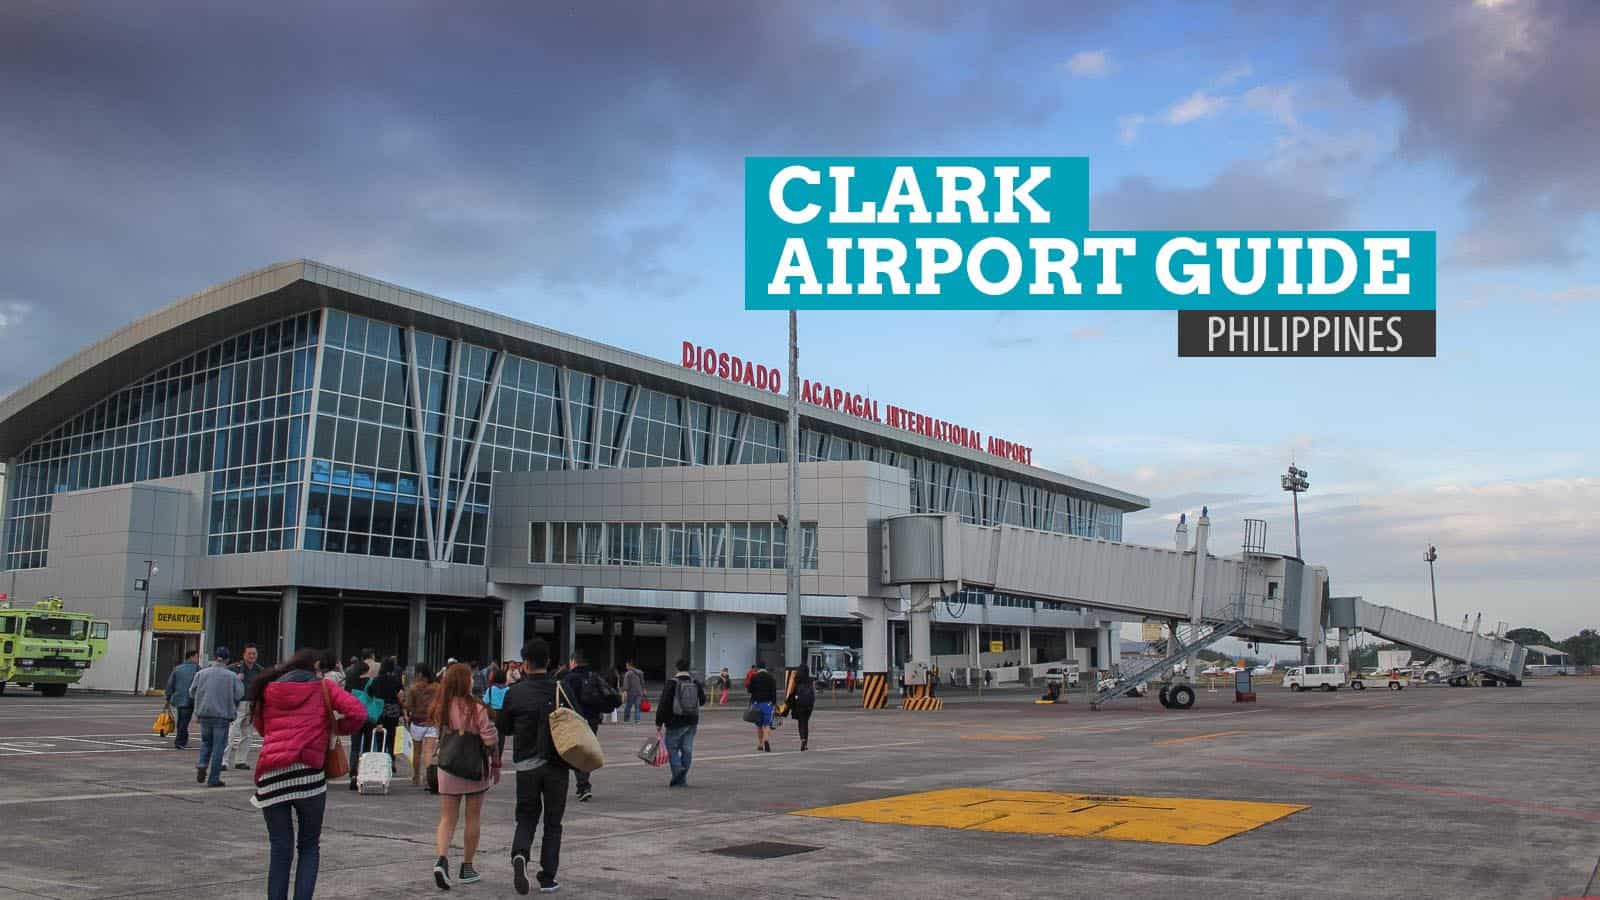 CLARK AIRPORT GUIDE: How to Get There, What to Do Before Flight